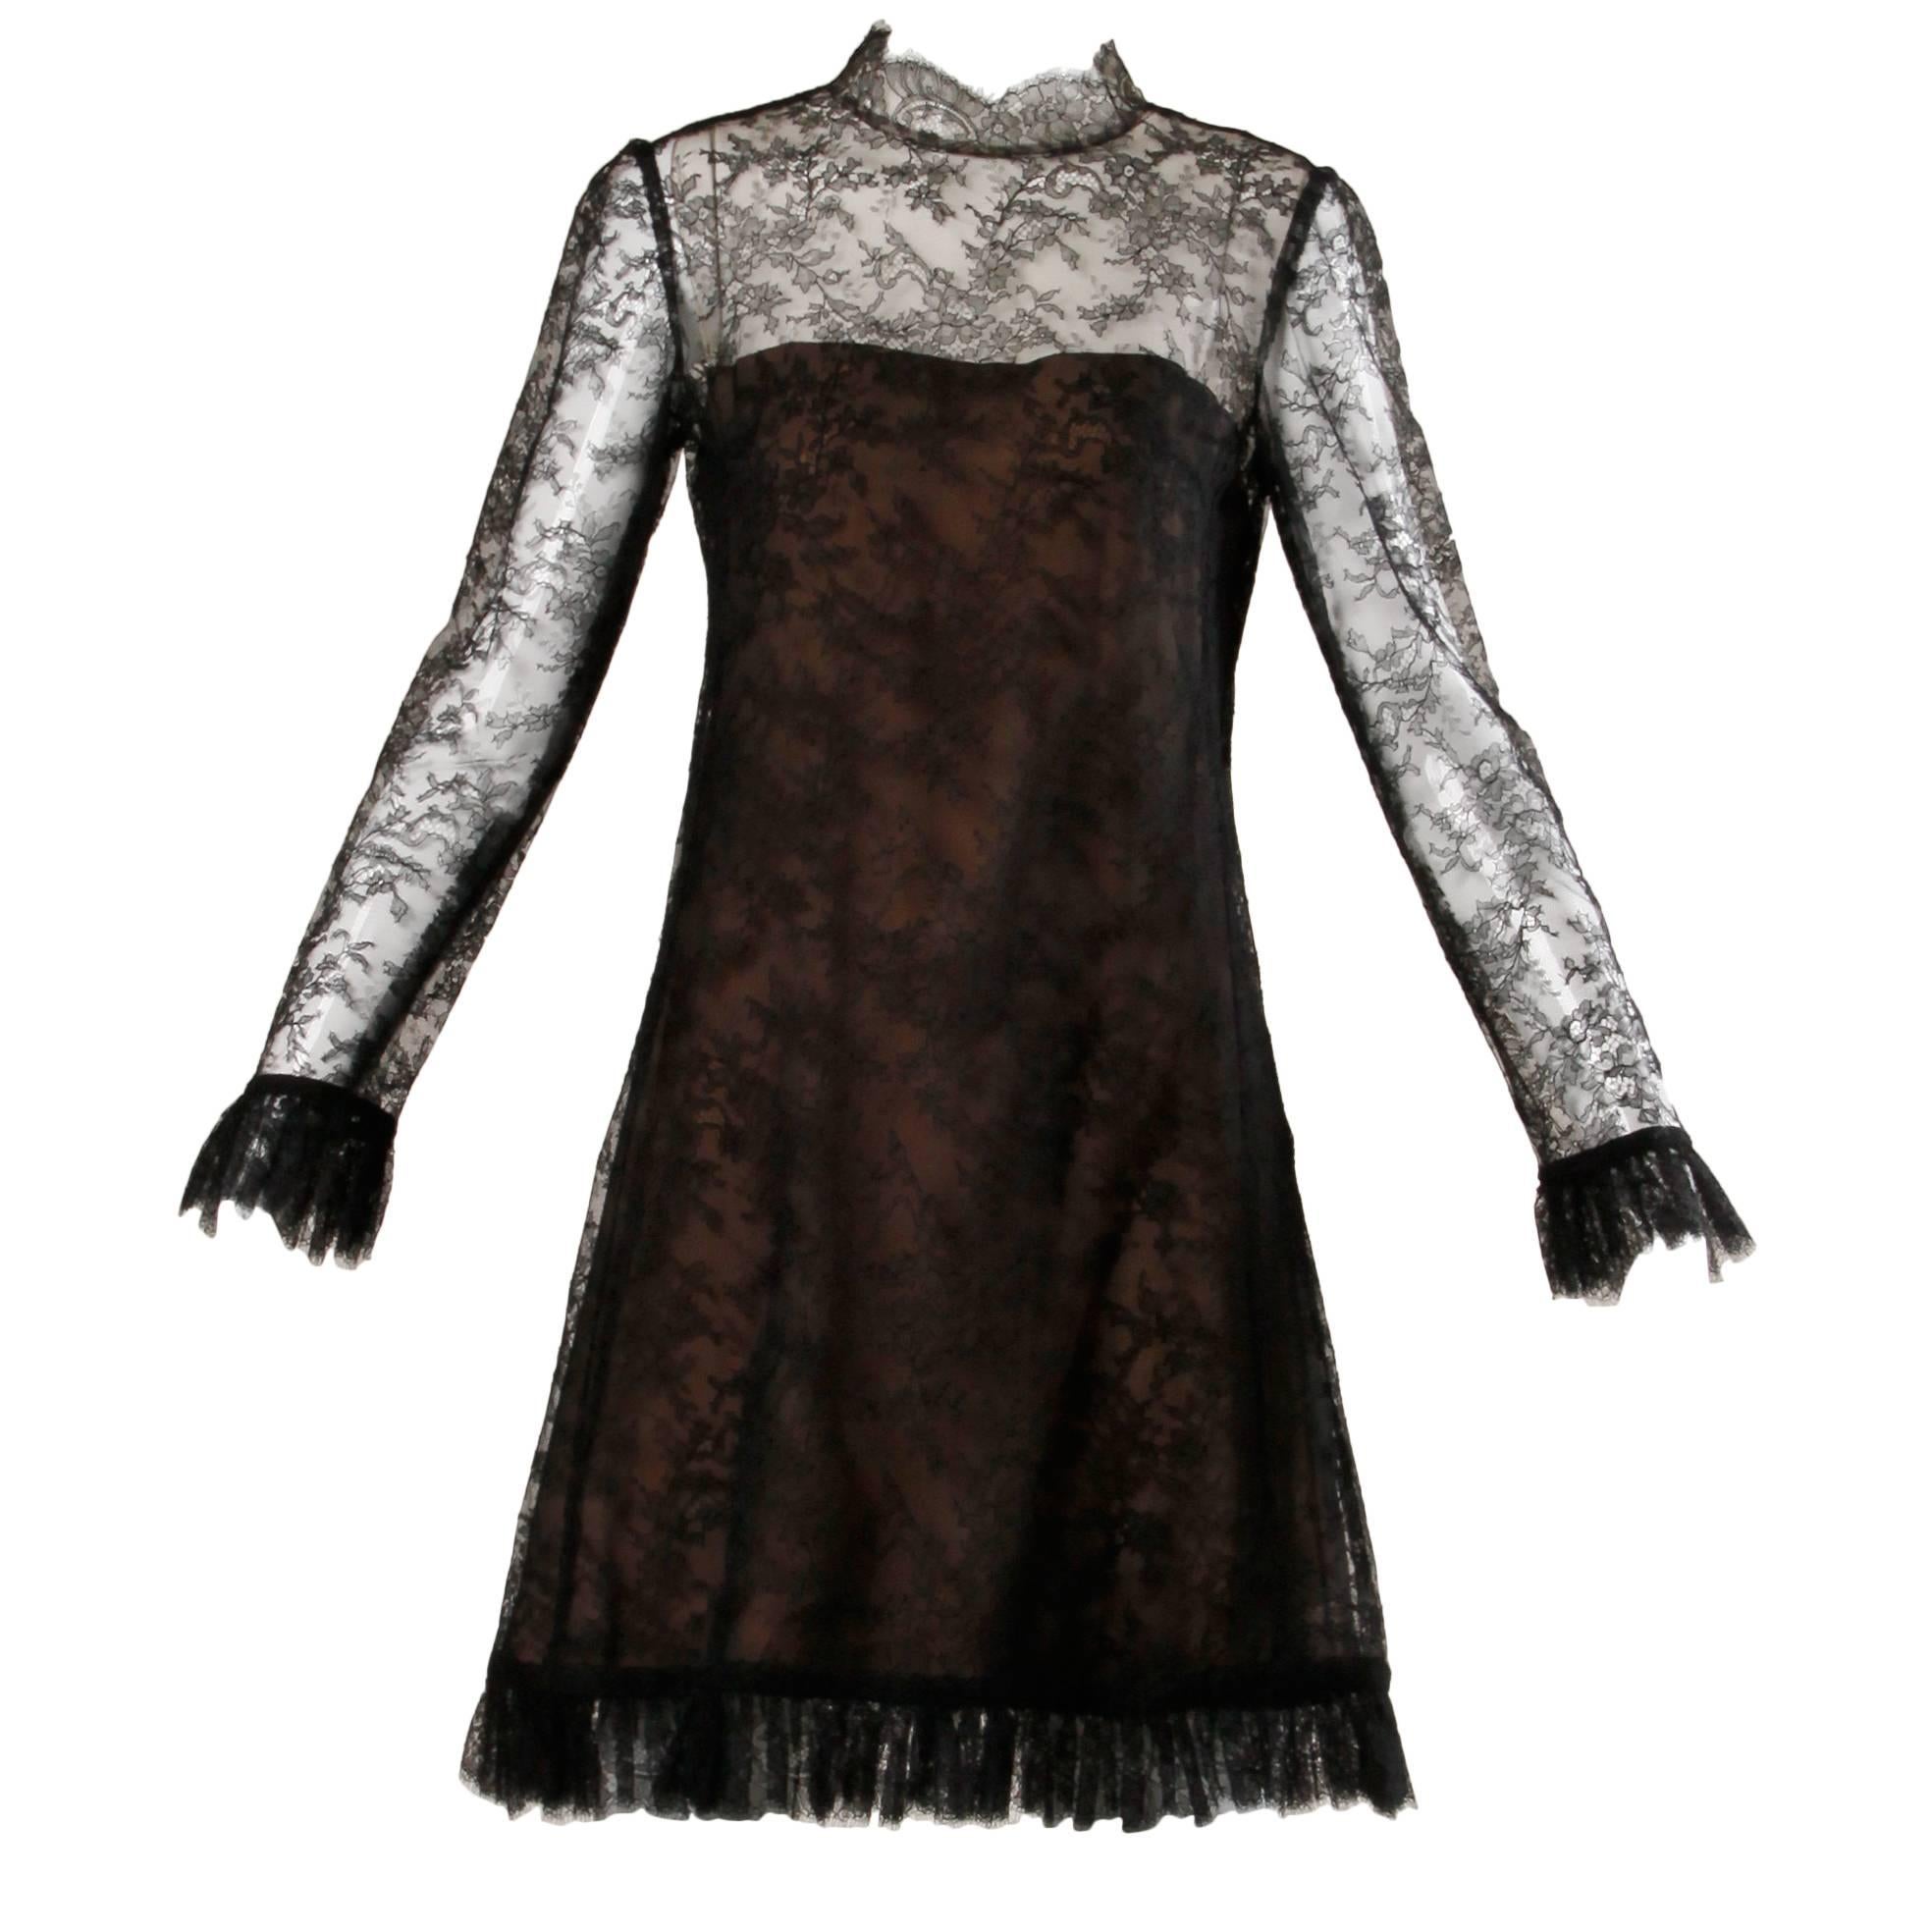 1960s Vintage Brown + Black Nude Illusion Chantilly Lace Cocktail Dress